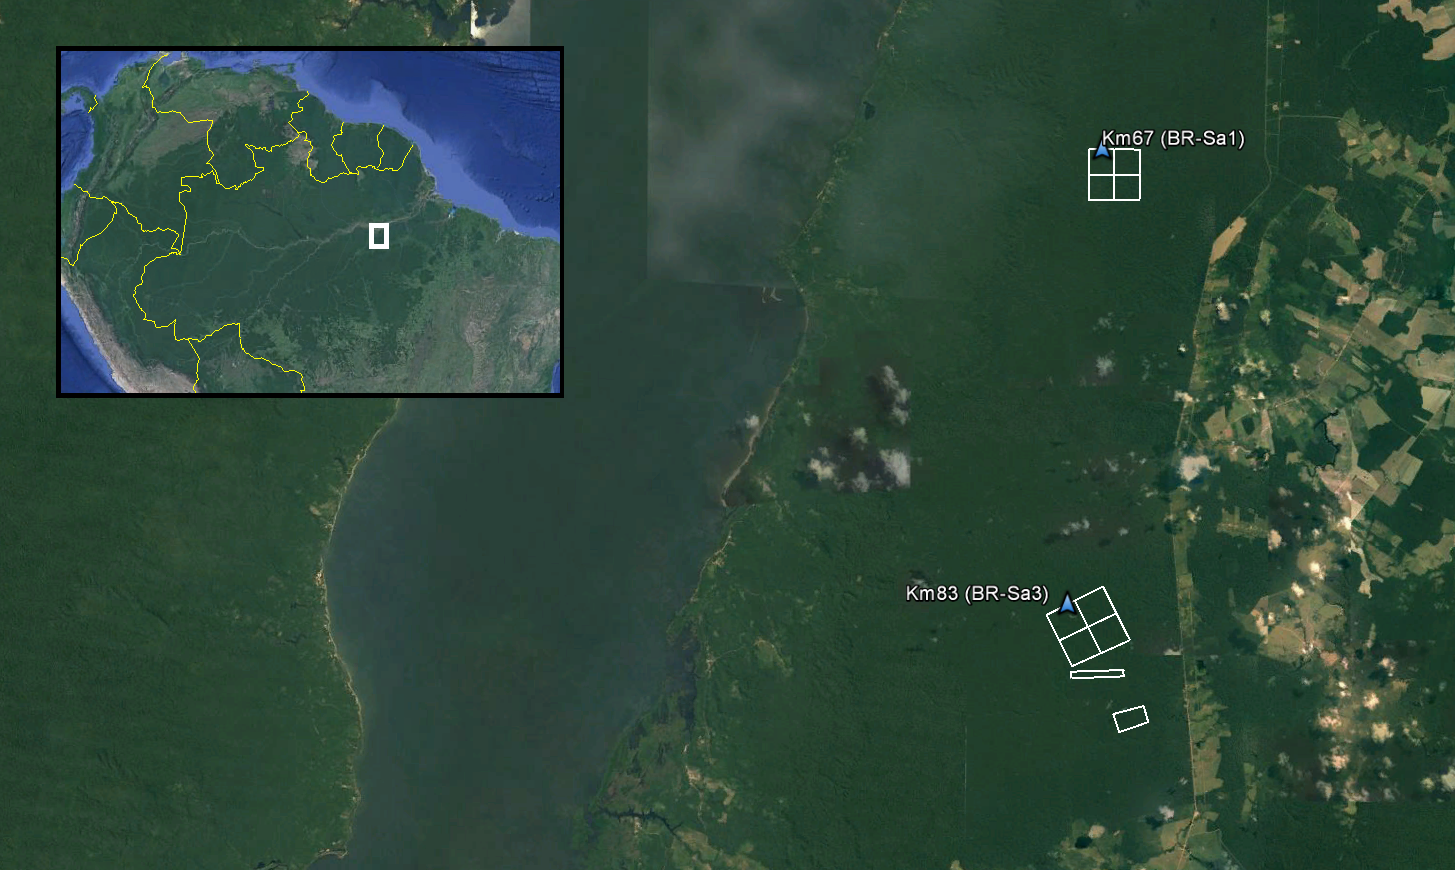 Footprints from each of the surveyed areas within Tapajos National Forest in Para, Brazil are included in TAP_A_footprints.shp. The Km67 and Km83 eddy flux towers (AmeriFlux Sites BR-Sa1 and BR-Sa3) are within the surveyed areas.